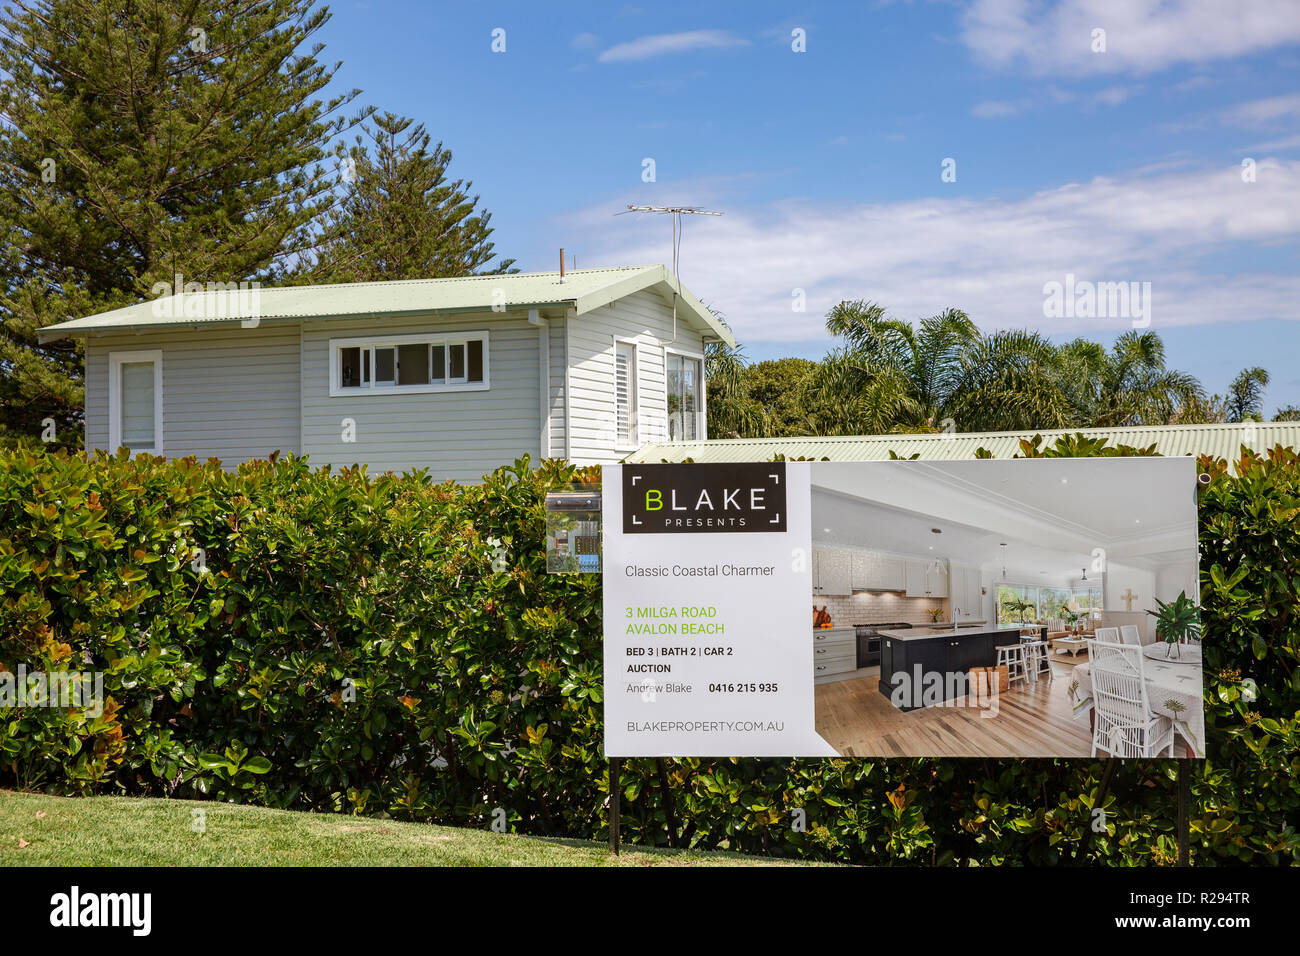 Weatherboard home in Sydney being marketed for sale,Sydney,Australia Stock Photo